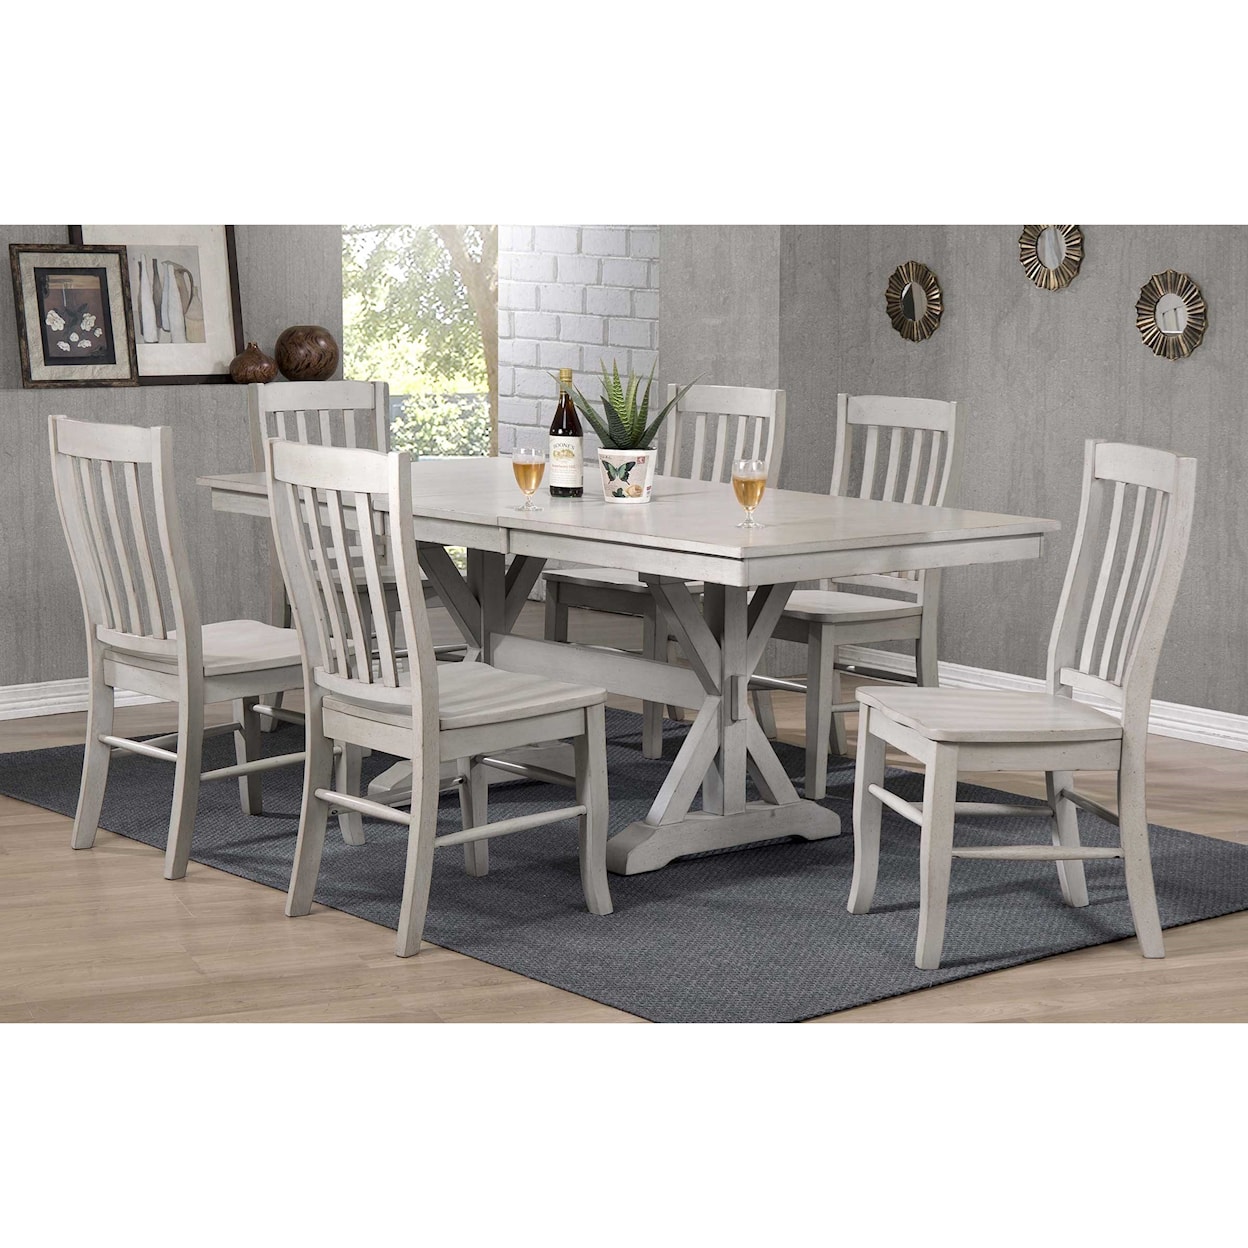 Winners Only Carmel Dining Table